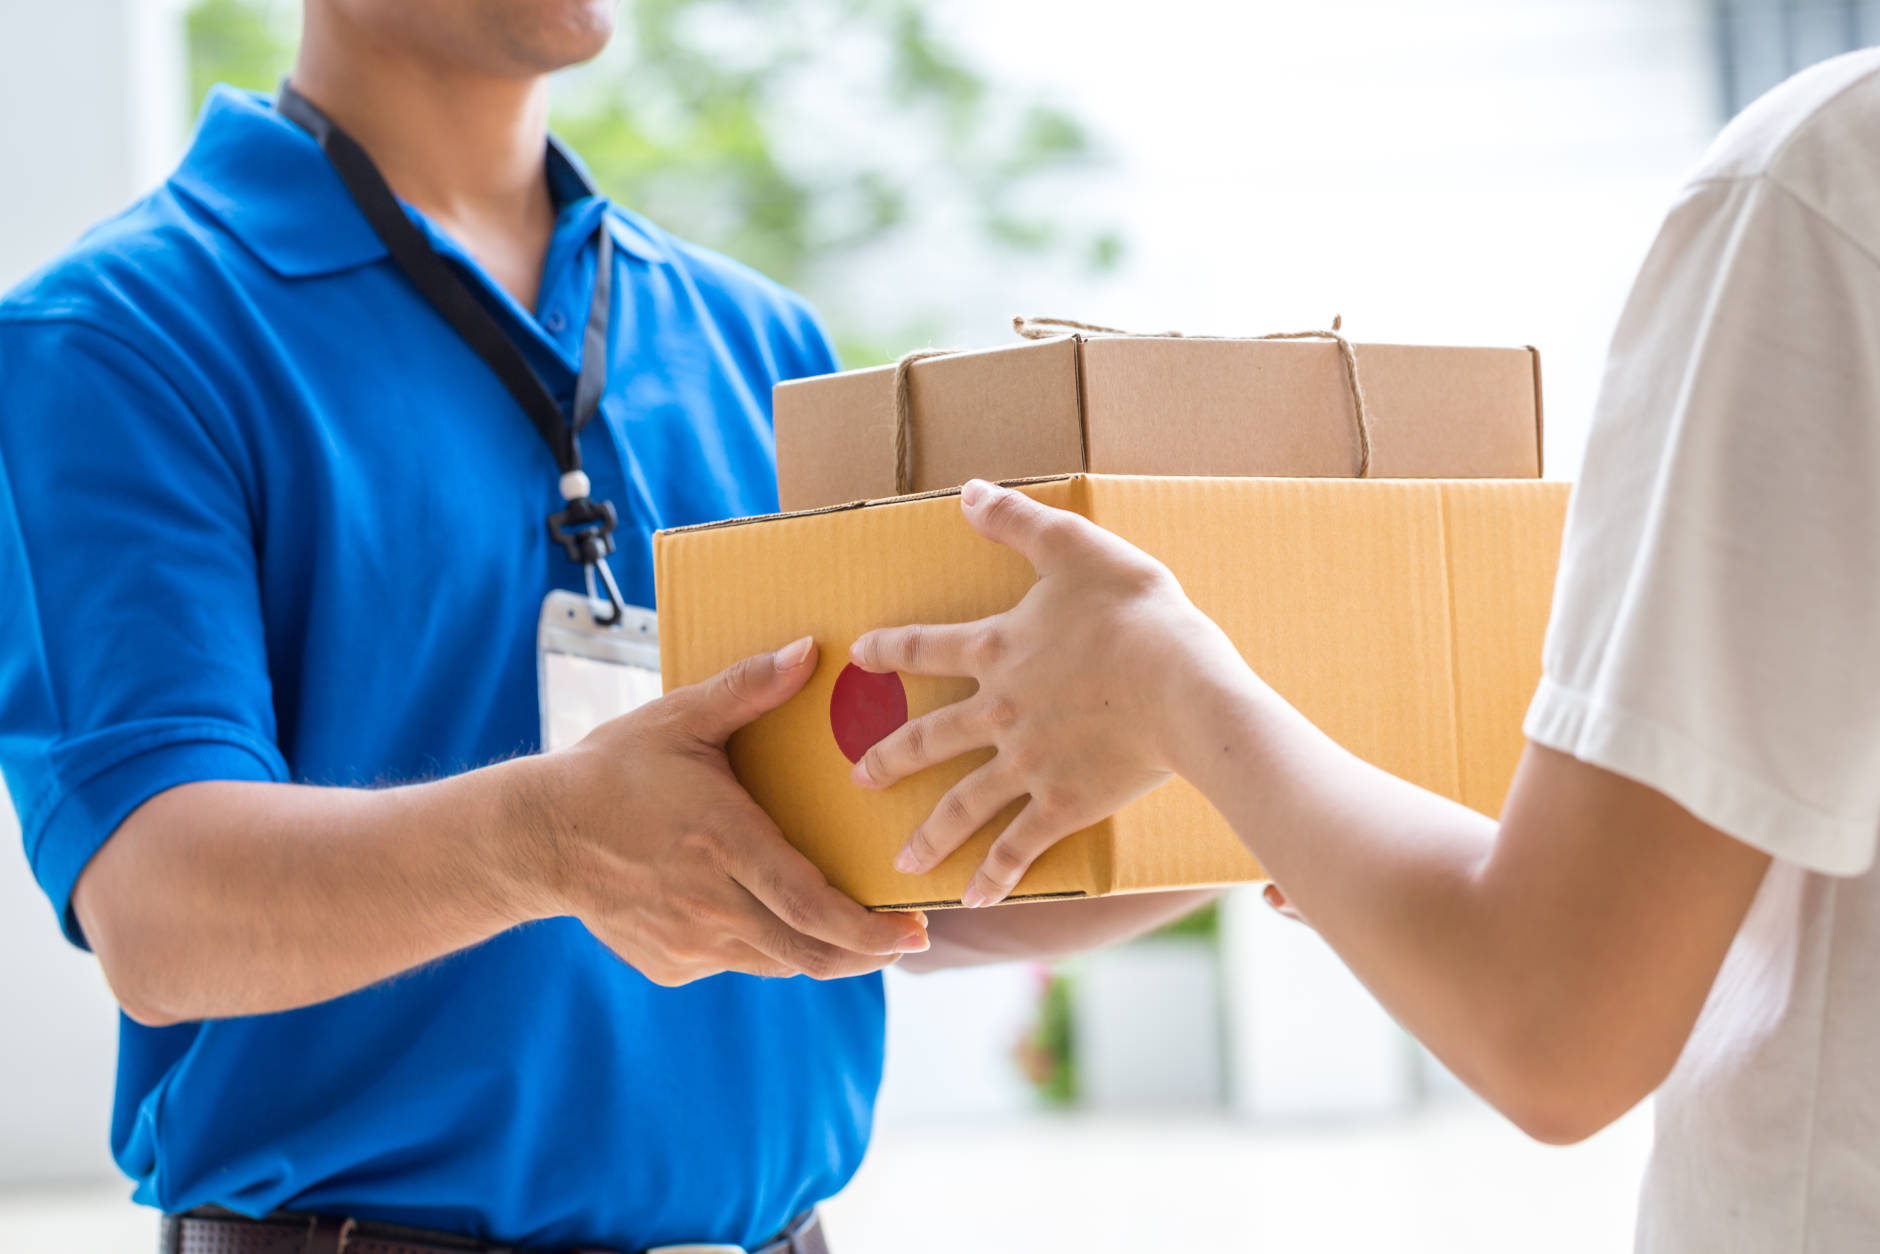 Use Subscribe & Save to get items you use often delivered automatically, at a discount.  You'll save even more if you receive 5 or more products monthly at one address. (Thinkstock)